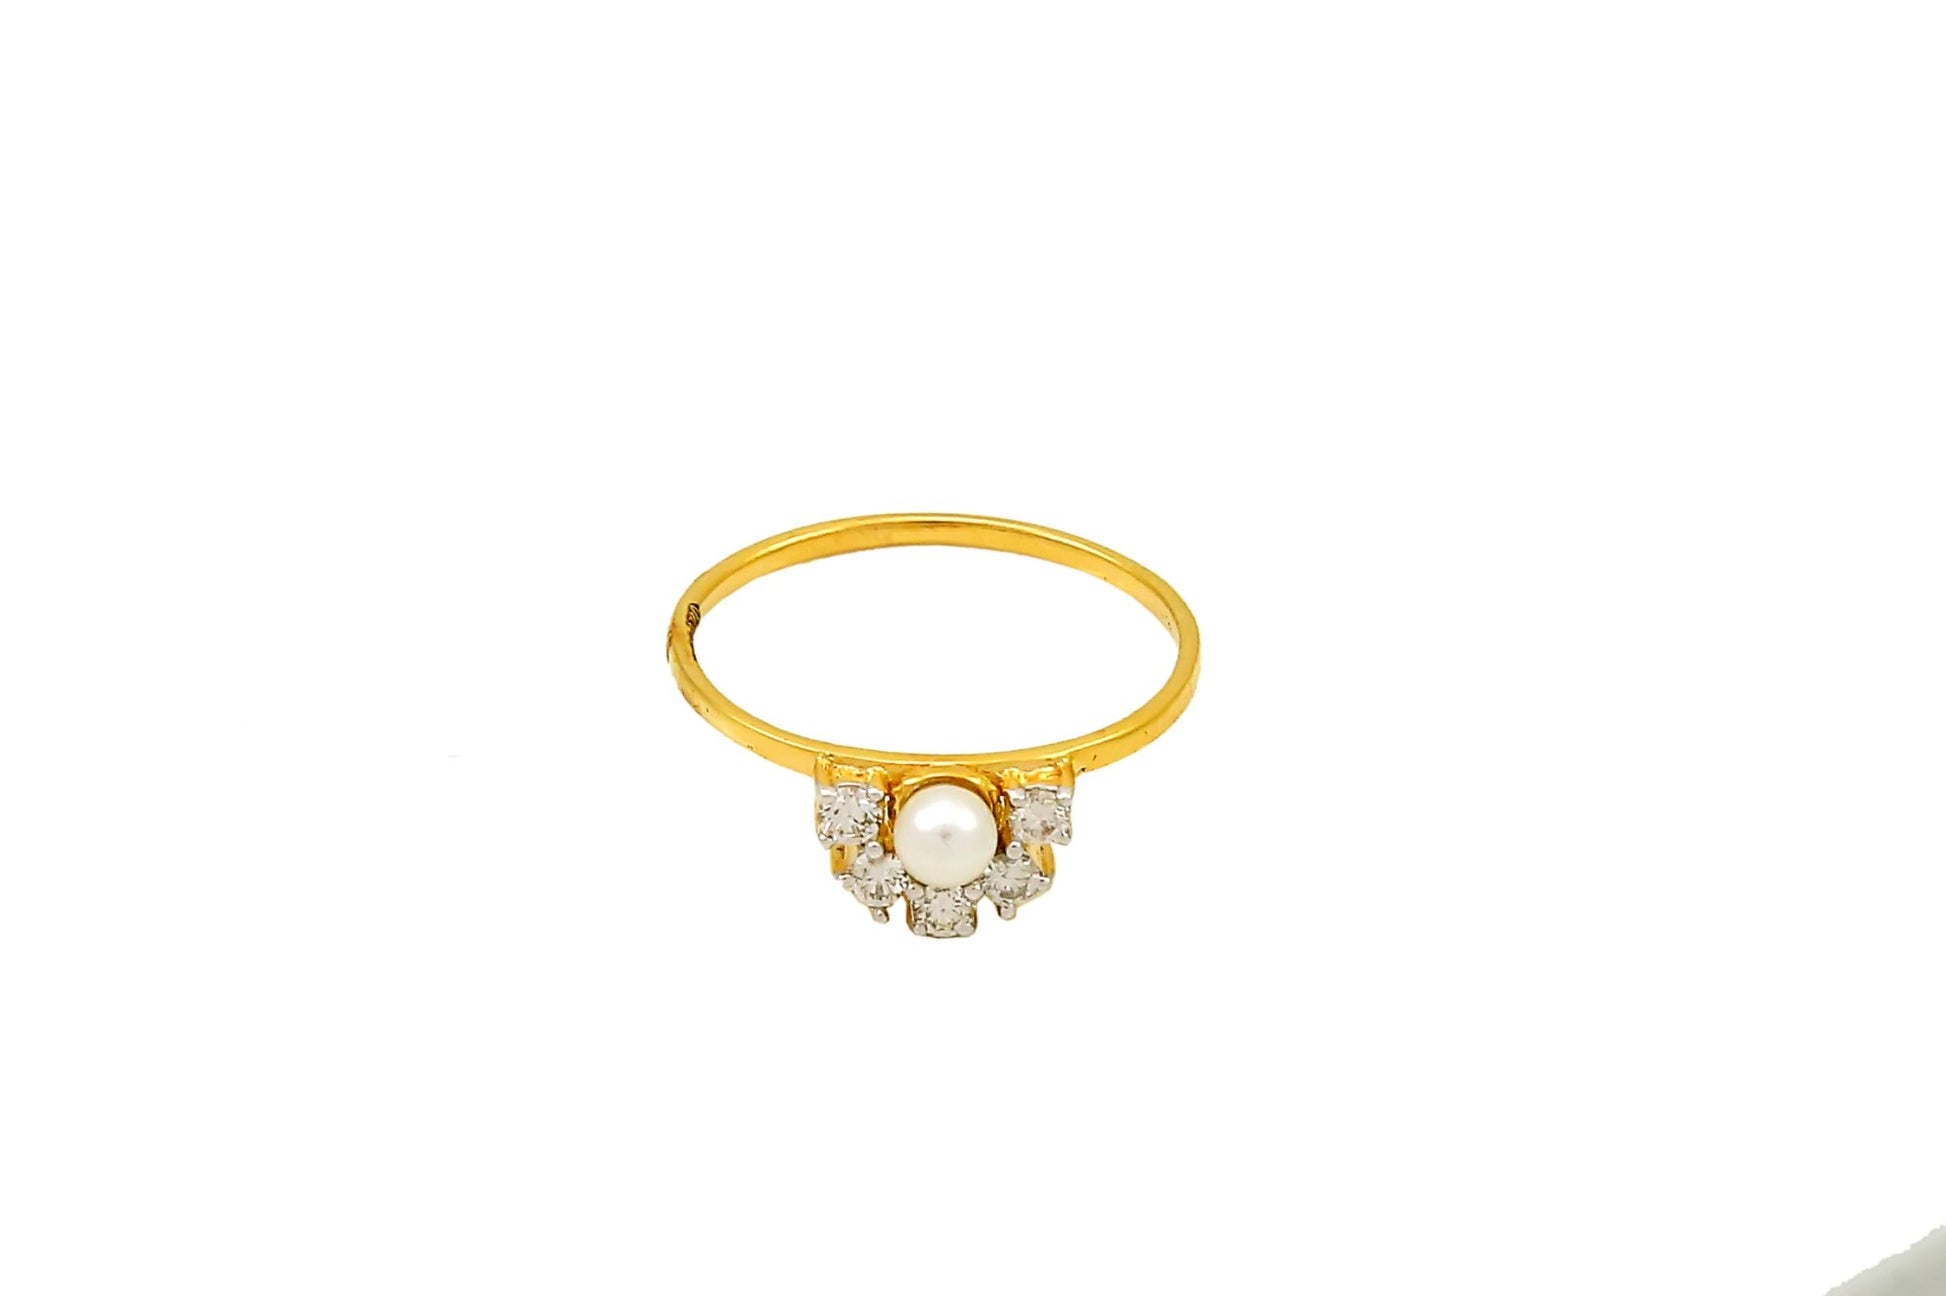 Yellow Gold Ring Half Circle setting with Five Diamonds and one Pearl14k TDW:0.2ct 1.46gr